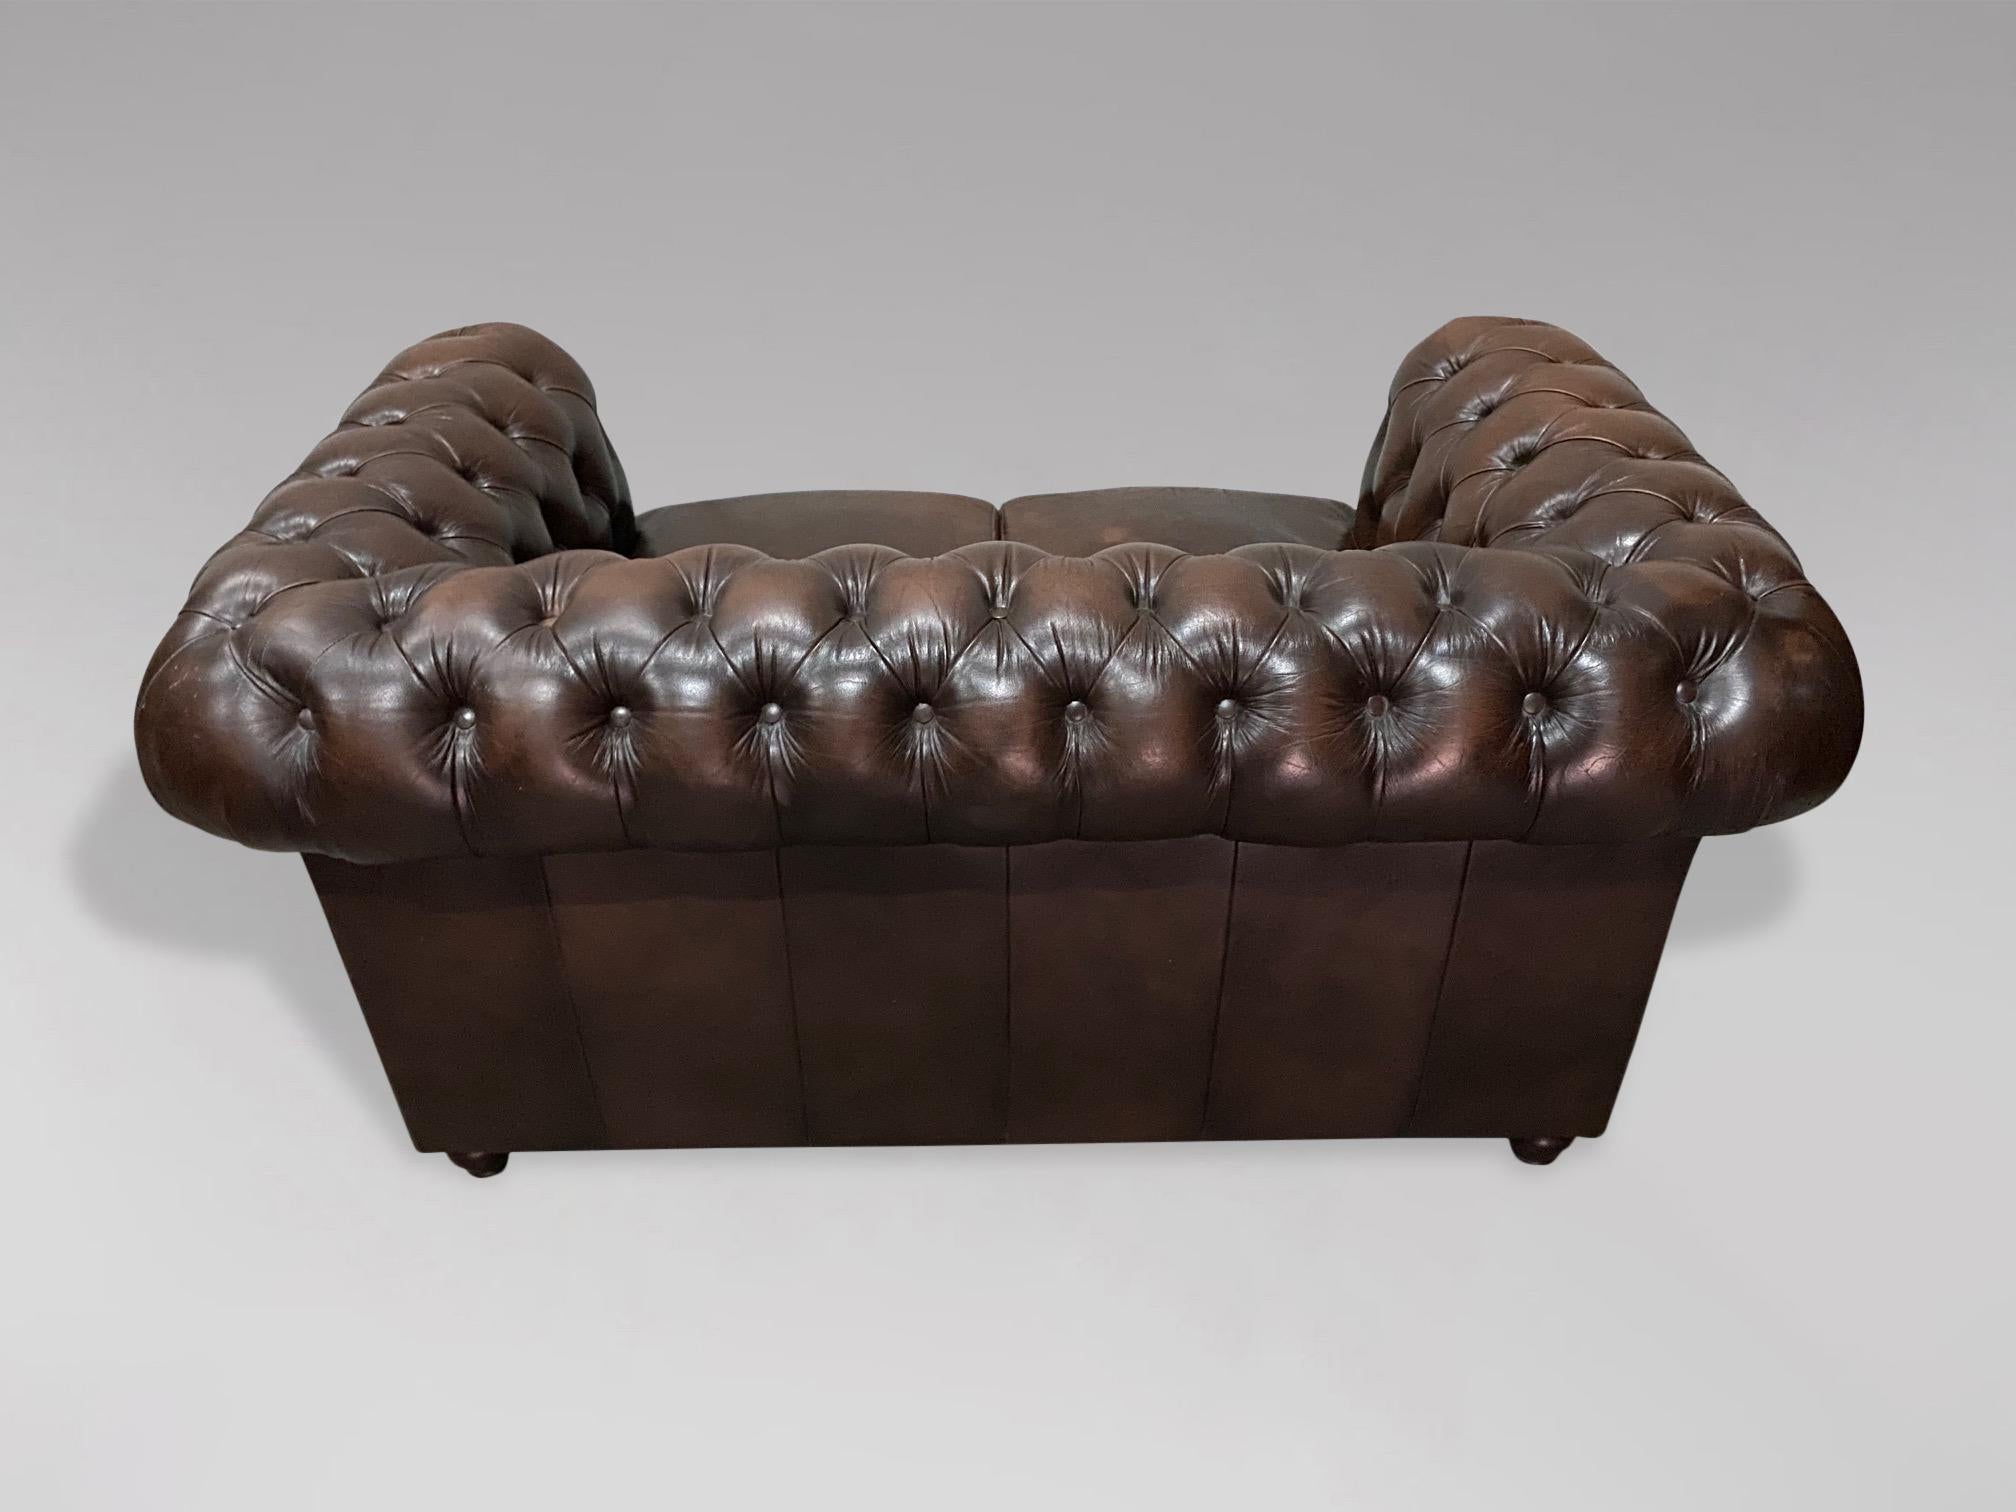 20th Century Vintage Brown Leather 2 Seater Chesterfield Sofa In Good Condition In Petworth,West Sussex, GB